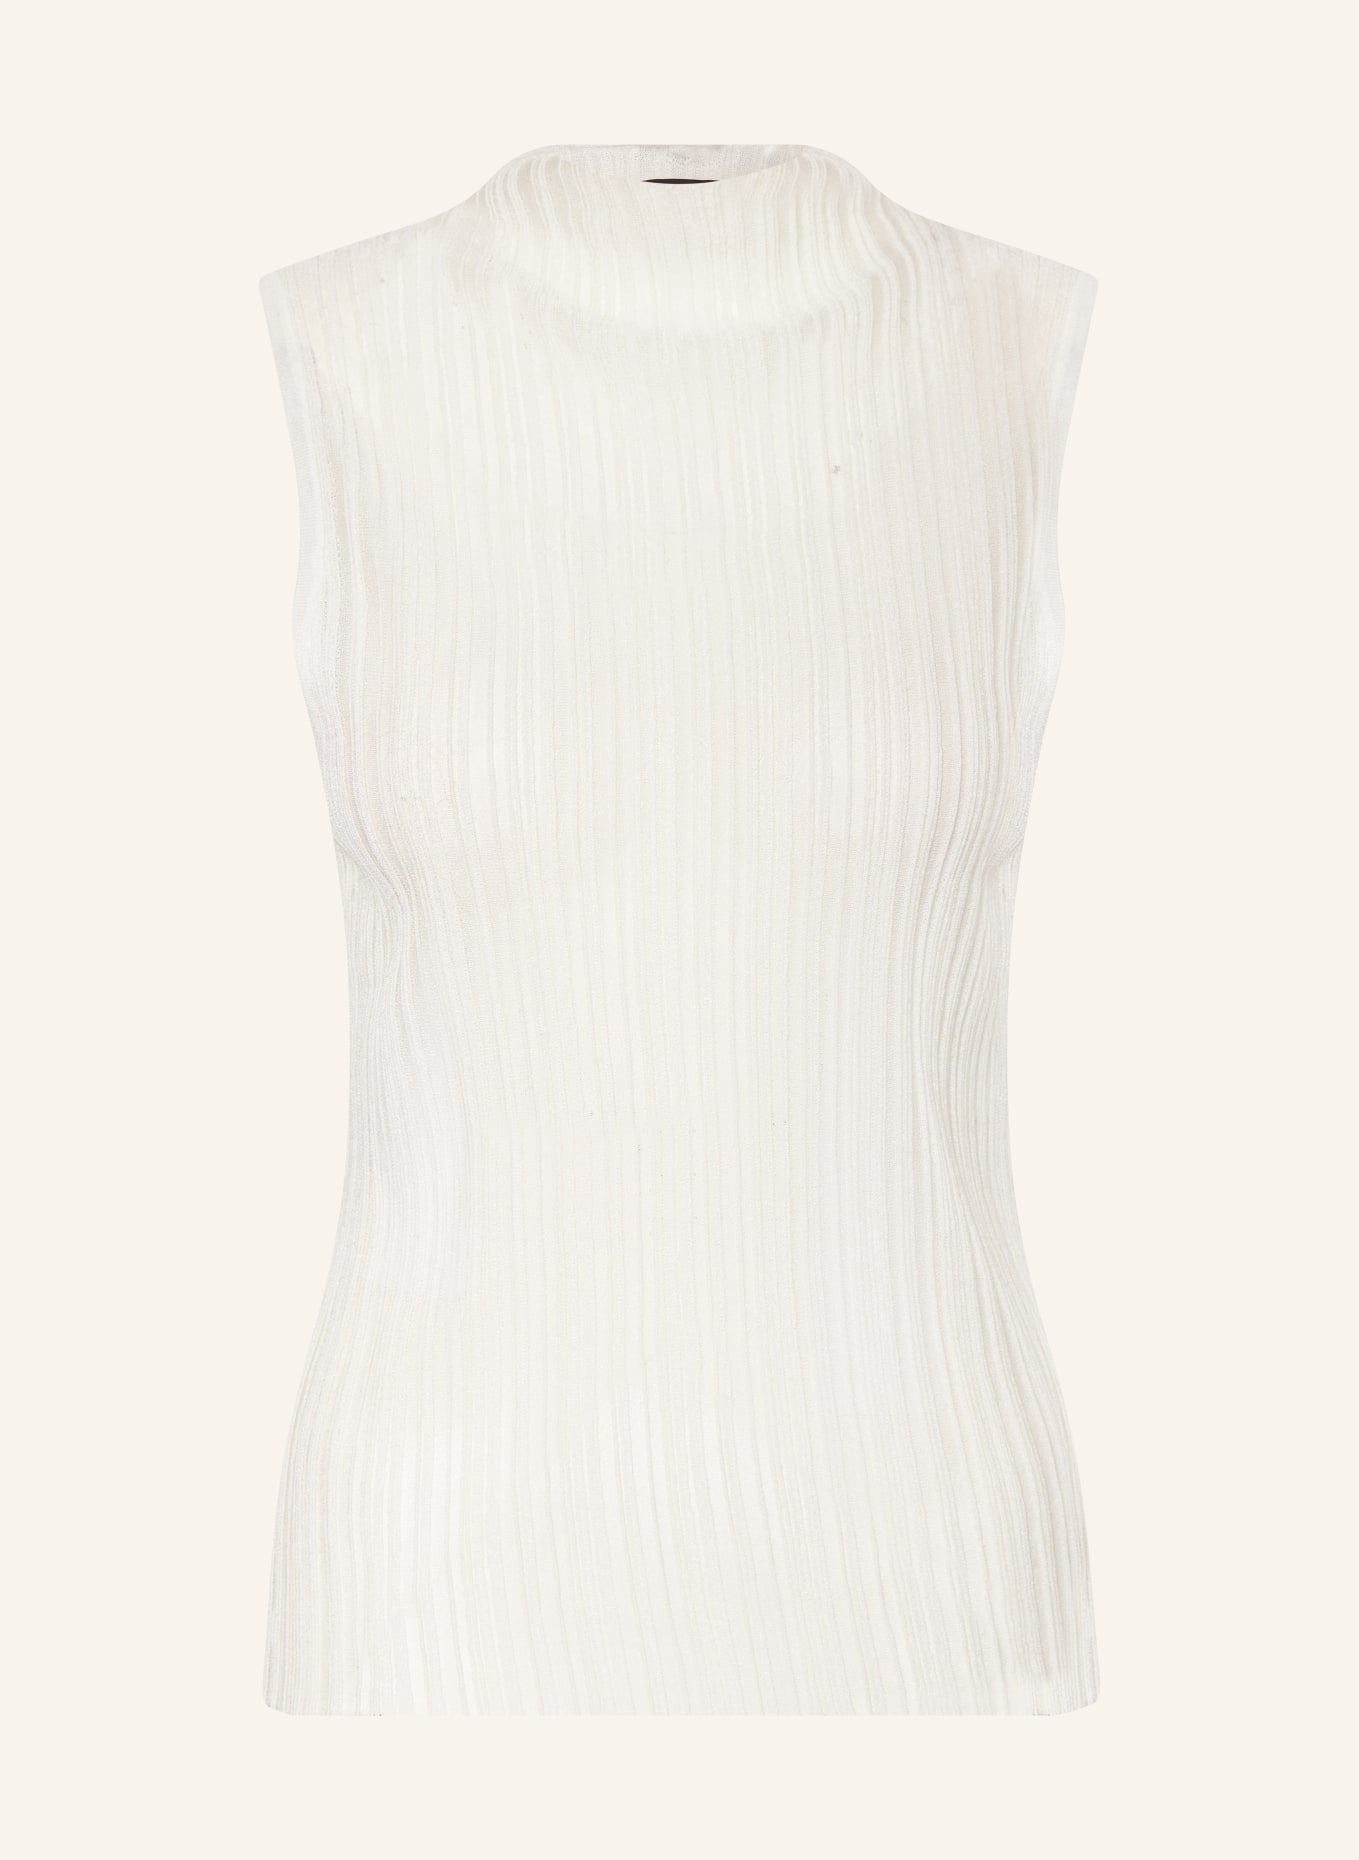 ANINE BING Knit top HARLOW, Color: CREAM (Image 1)